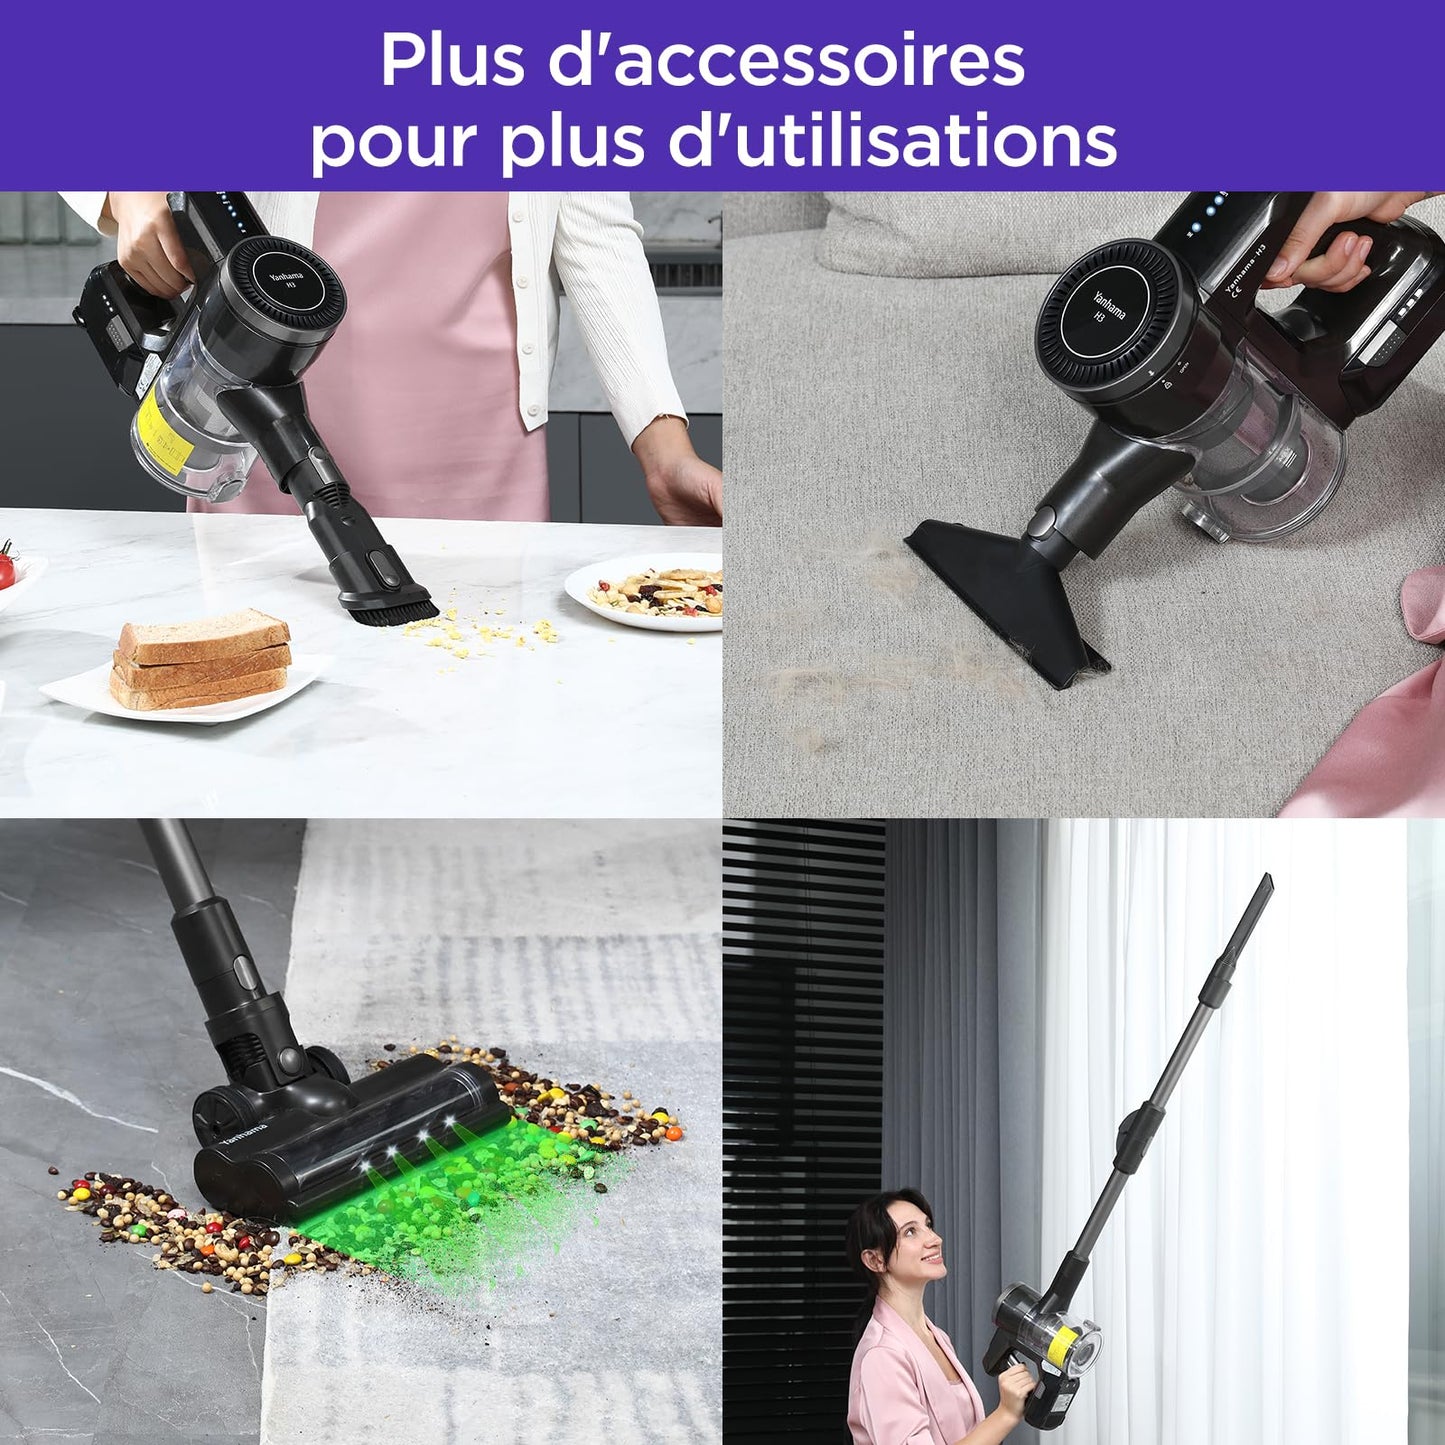 Electric Brooms for Home, Black